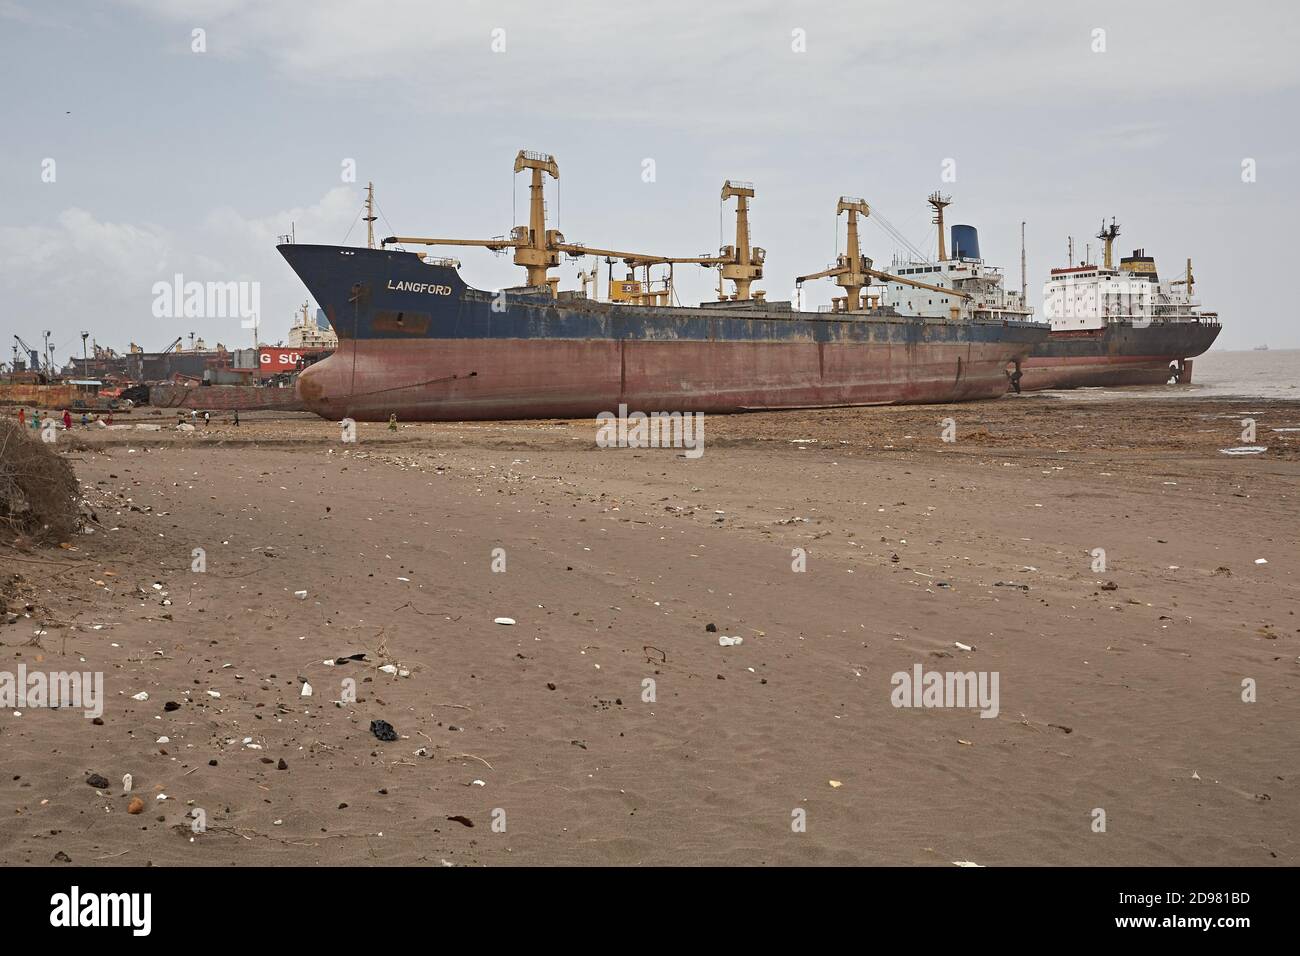 Alang, India, September 2008. Large tonnage cargo ship stranded on the beach waiting to be scrapped. Stock Photo